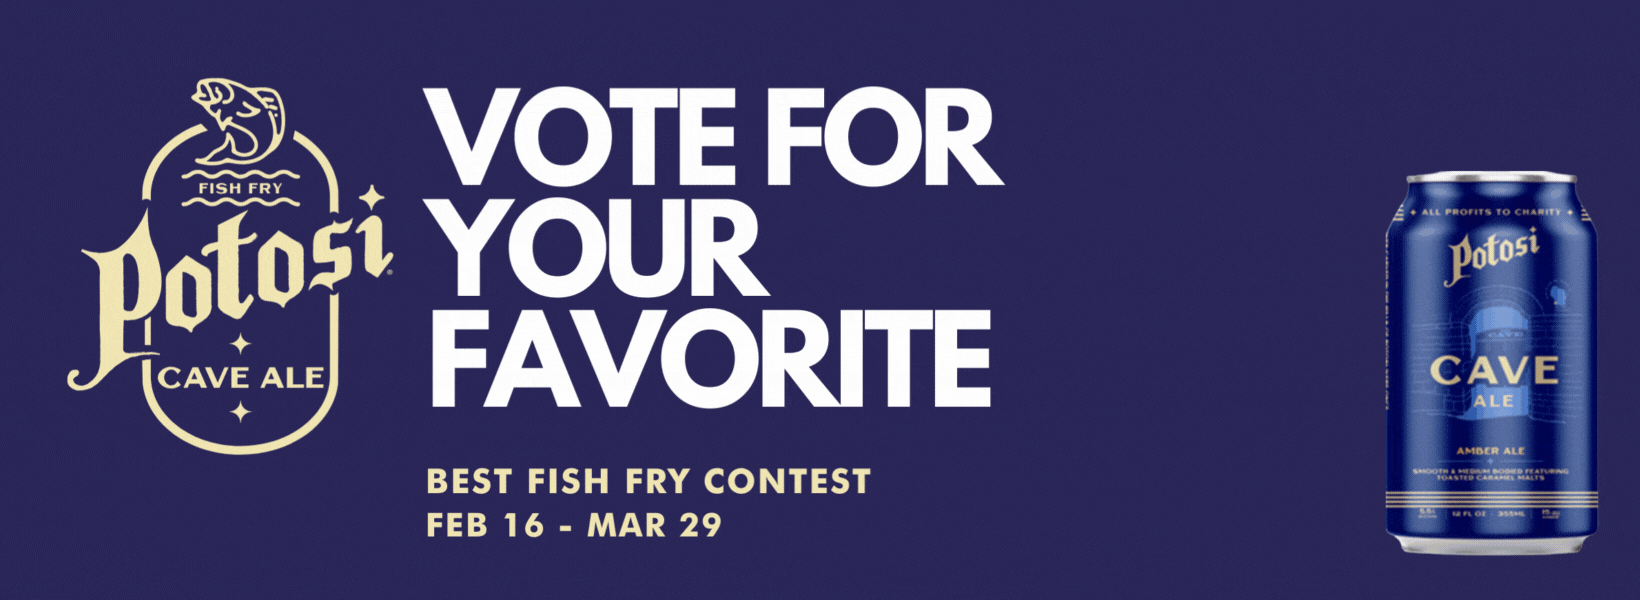 Potosi Cave Ale Fish Fry Promotion Vote for your favorite Fish Fry Feb 16 through March 24